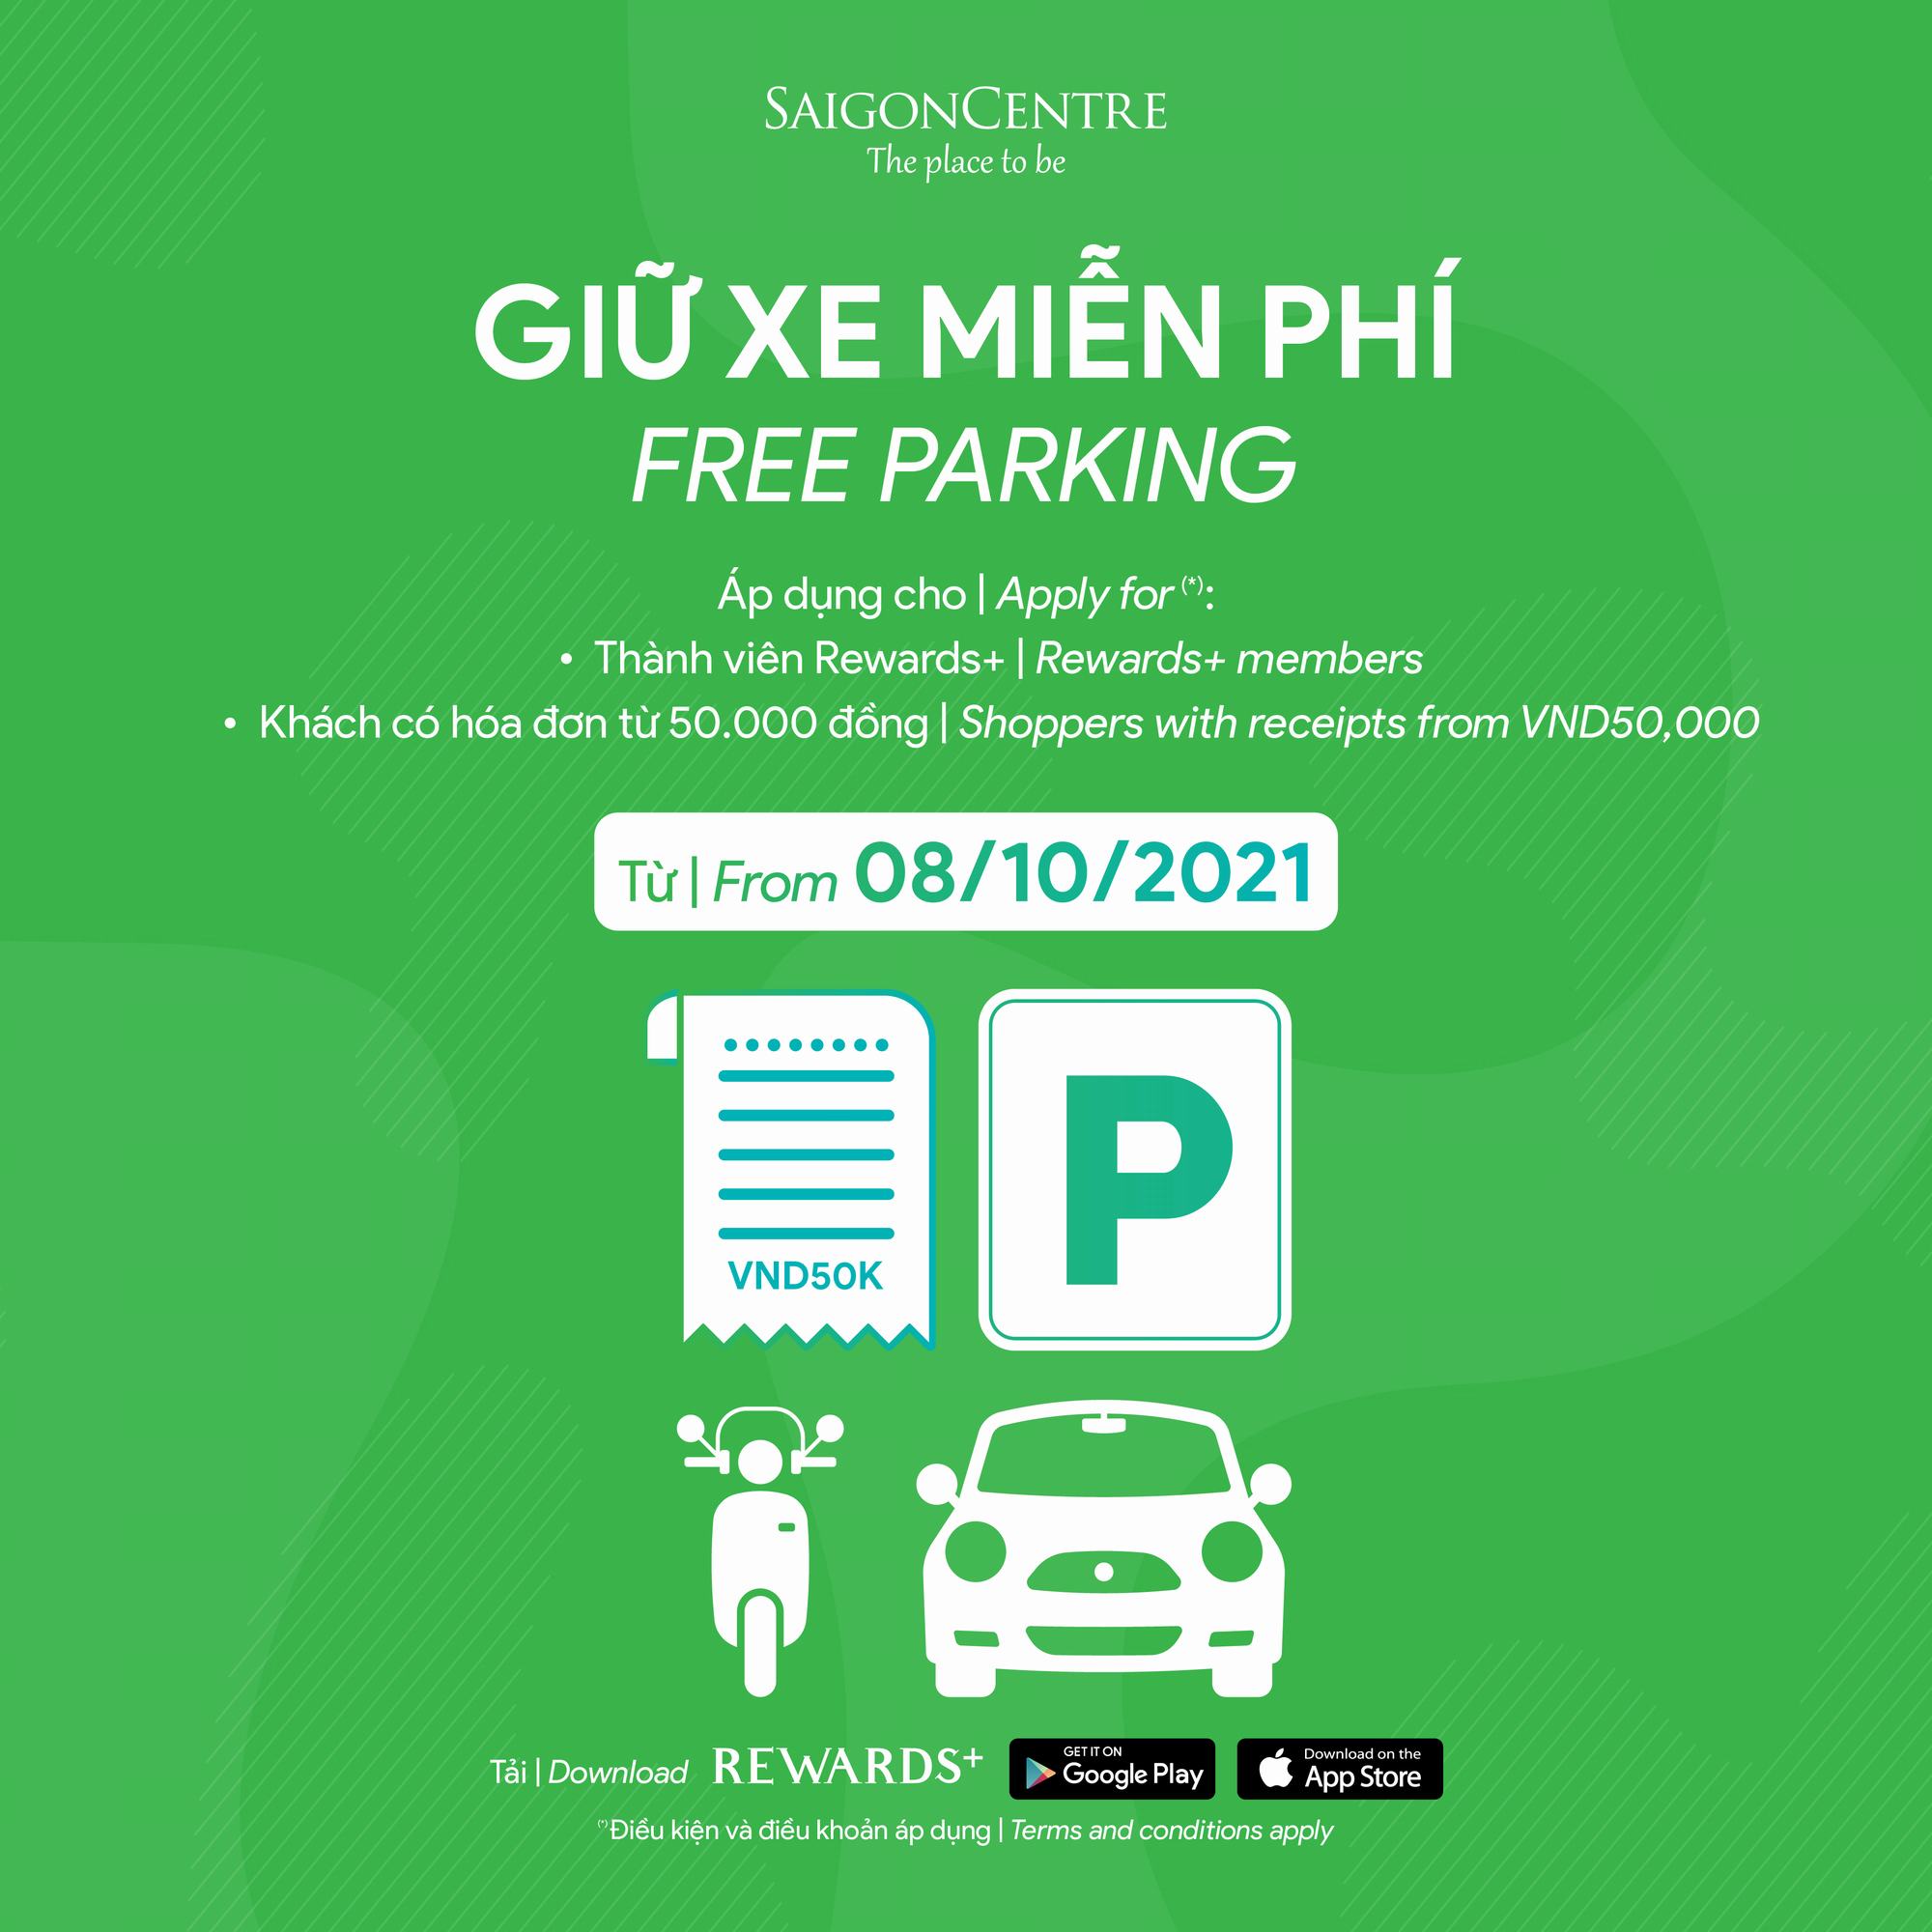 FREE PARKING FOR REWARDS+ MEMBERS OR VND50K RECEIPTS